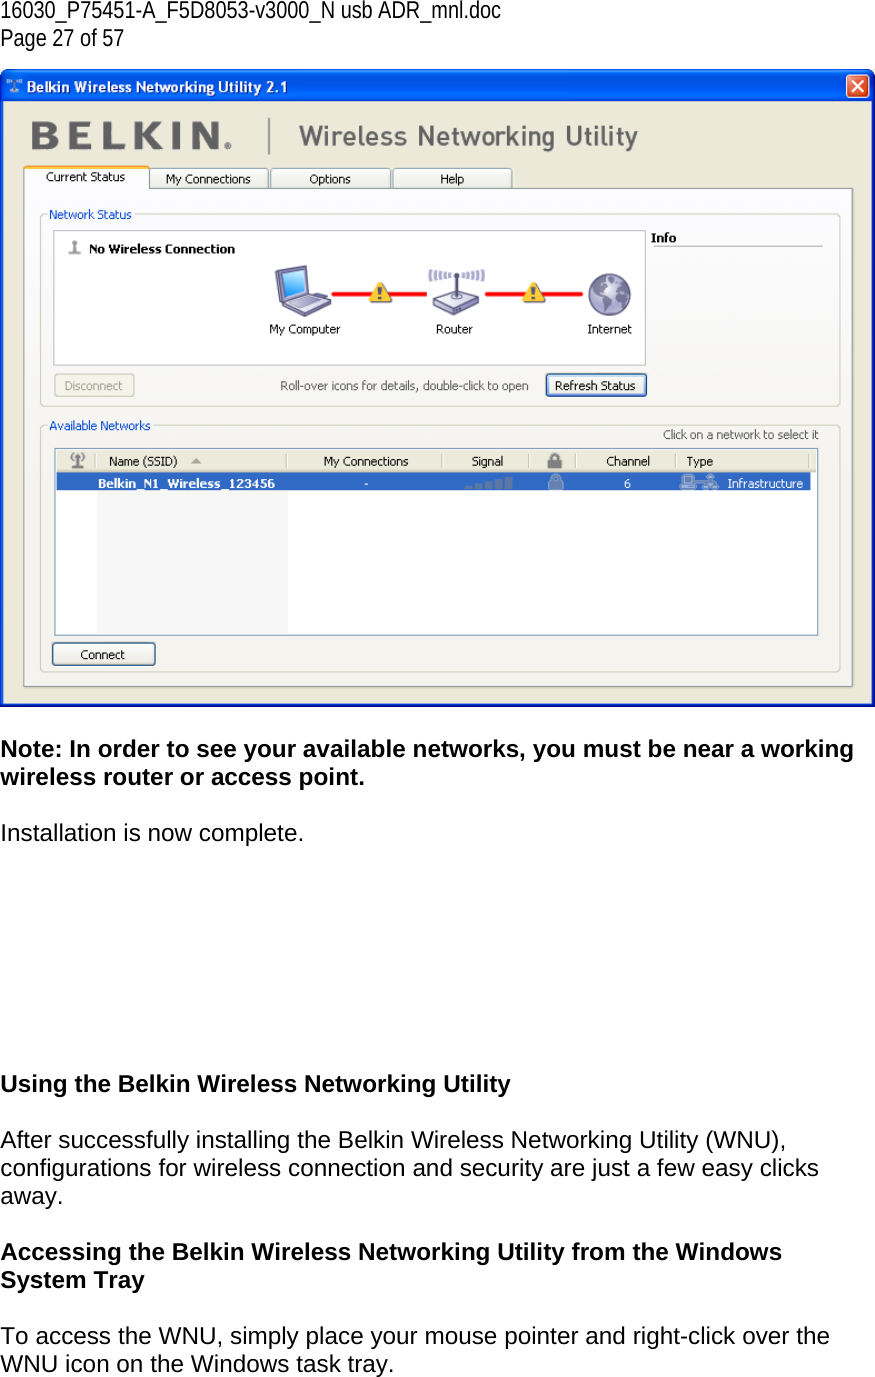 16030_P75451-A_F5D8053-v3000_N usb ADR_mnl.doc  Page 27 of 57   Note: In order to see your available networks, you must be near a working wireless router or access point.  Installation is now complete.         Using the Belkin Wireless Networking Utility   After successfully installing the Belkin Wireless Networking Utility (WNU), configurations for wireless connection and security are just a few easy clicks away.  Accessing the Belkin Wireless Networking Utility from the Windows System Tray  To access the WNU, simply place your mouse pointer and right-click over the WNU icon on the Windows task tray.  